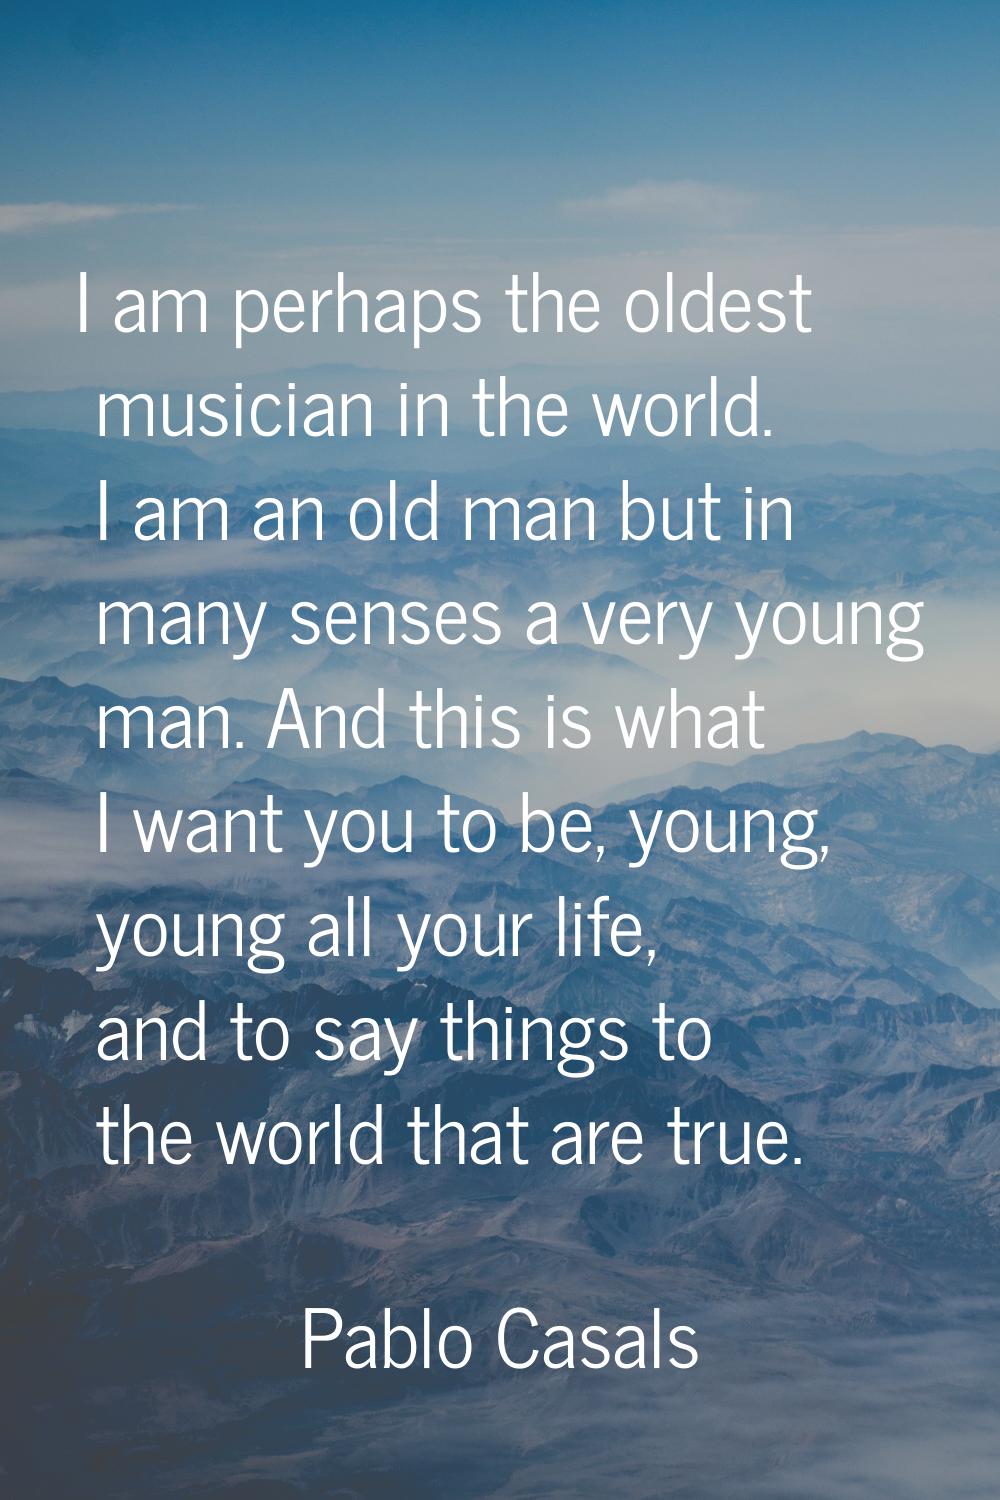 I am perhaps the oldest musician in the world. I am an old man but in many senses a very young man.